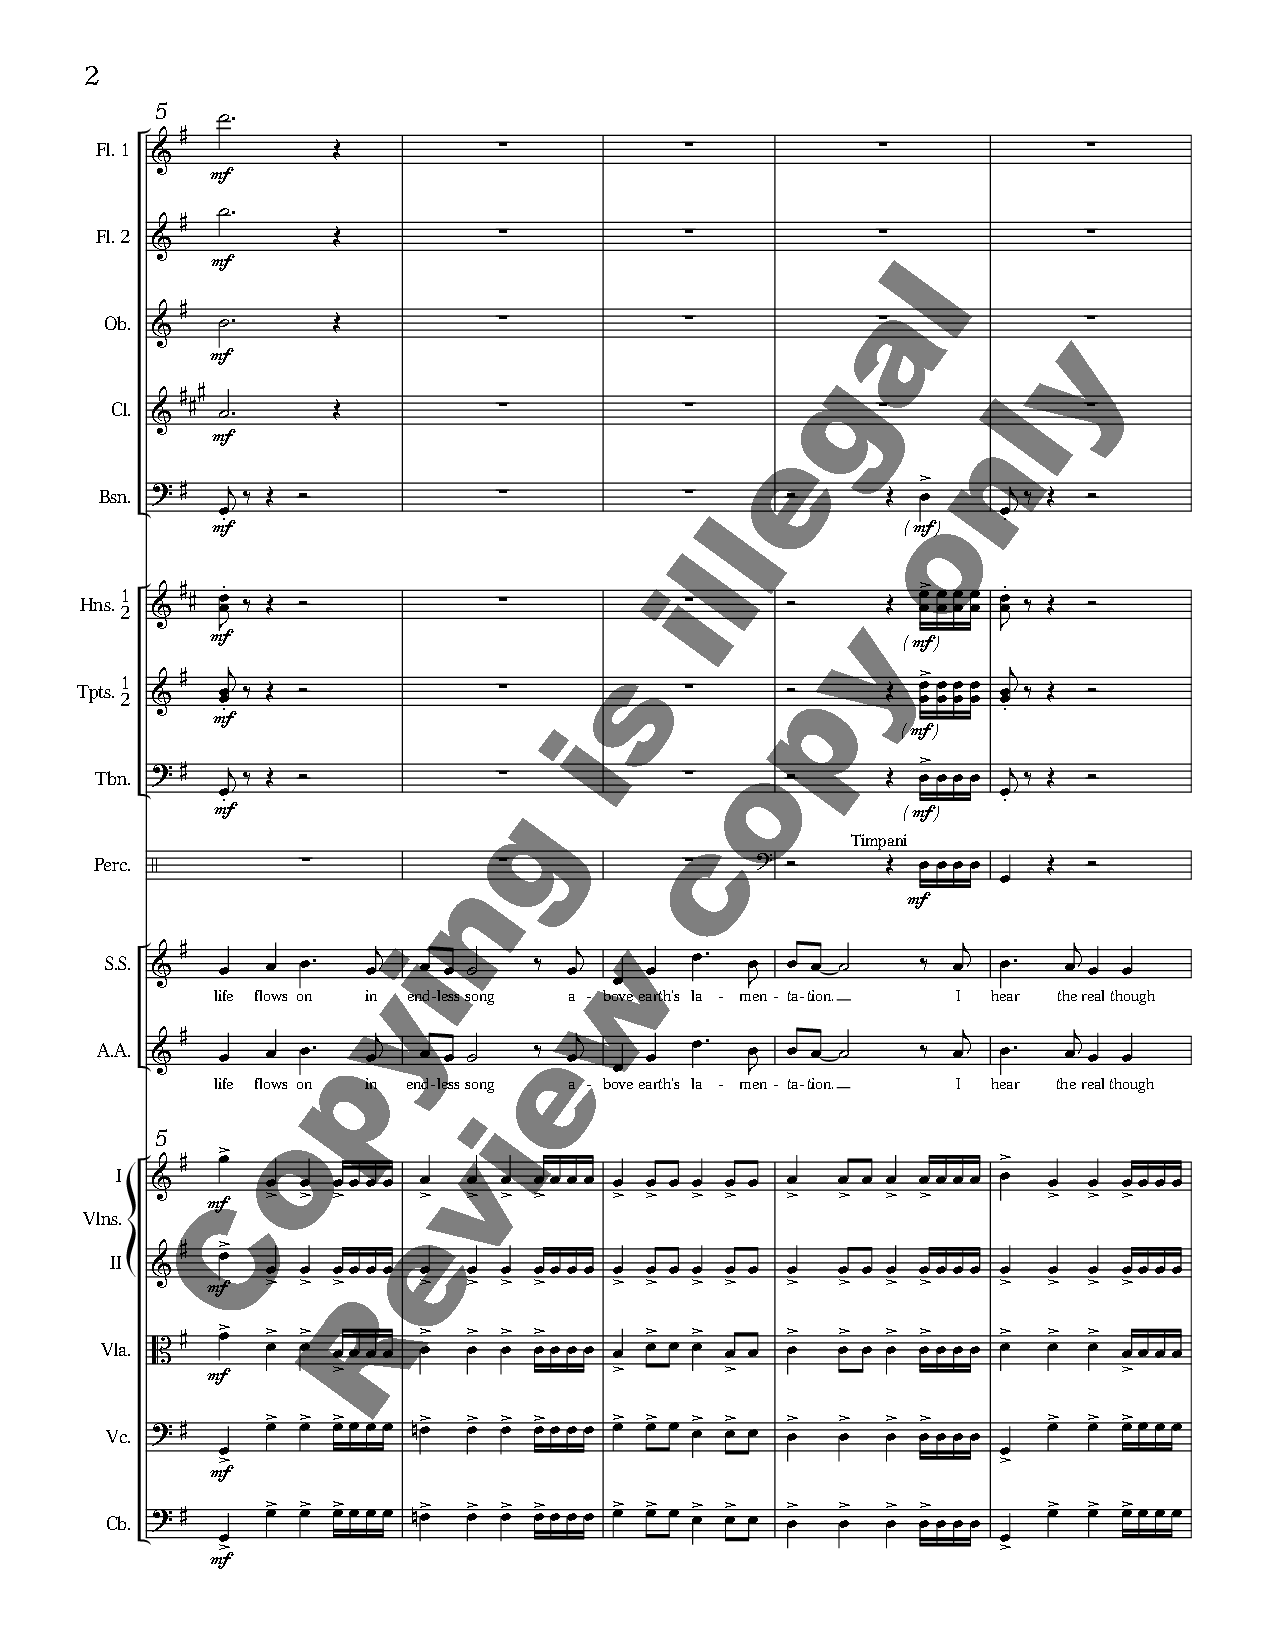 How Can I Keep From Singing Chamber Orchestra Full Score SSAA